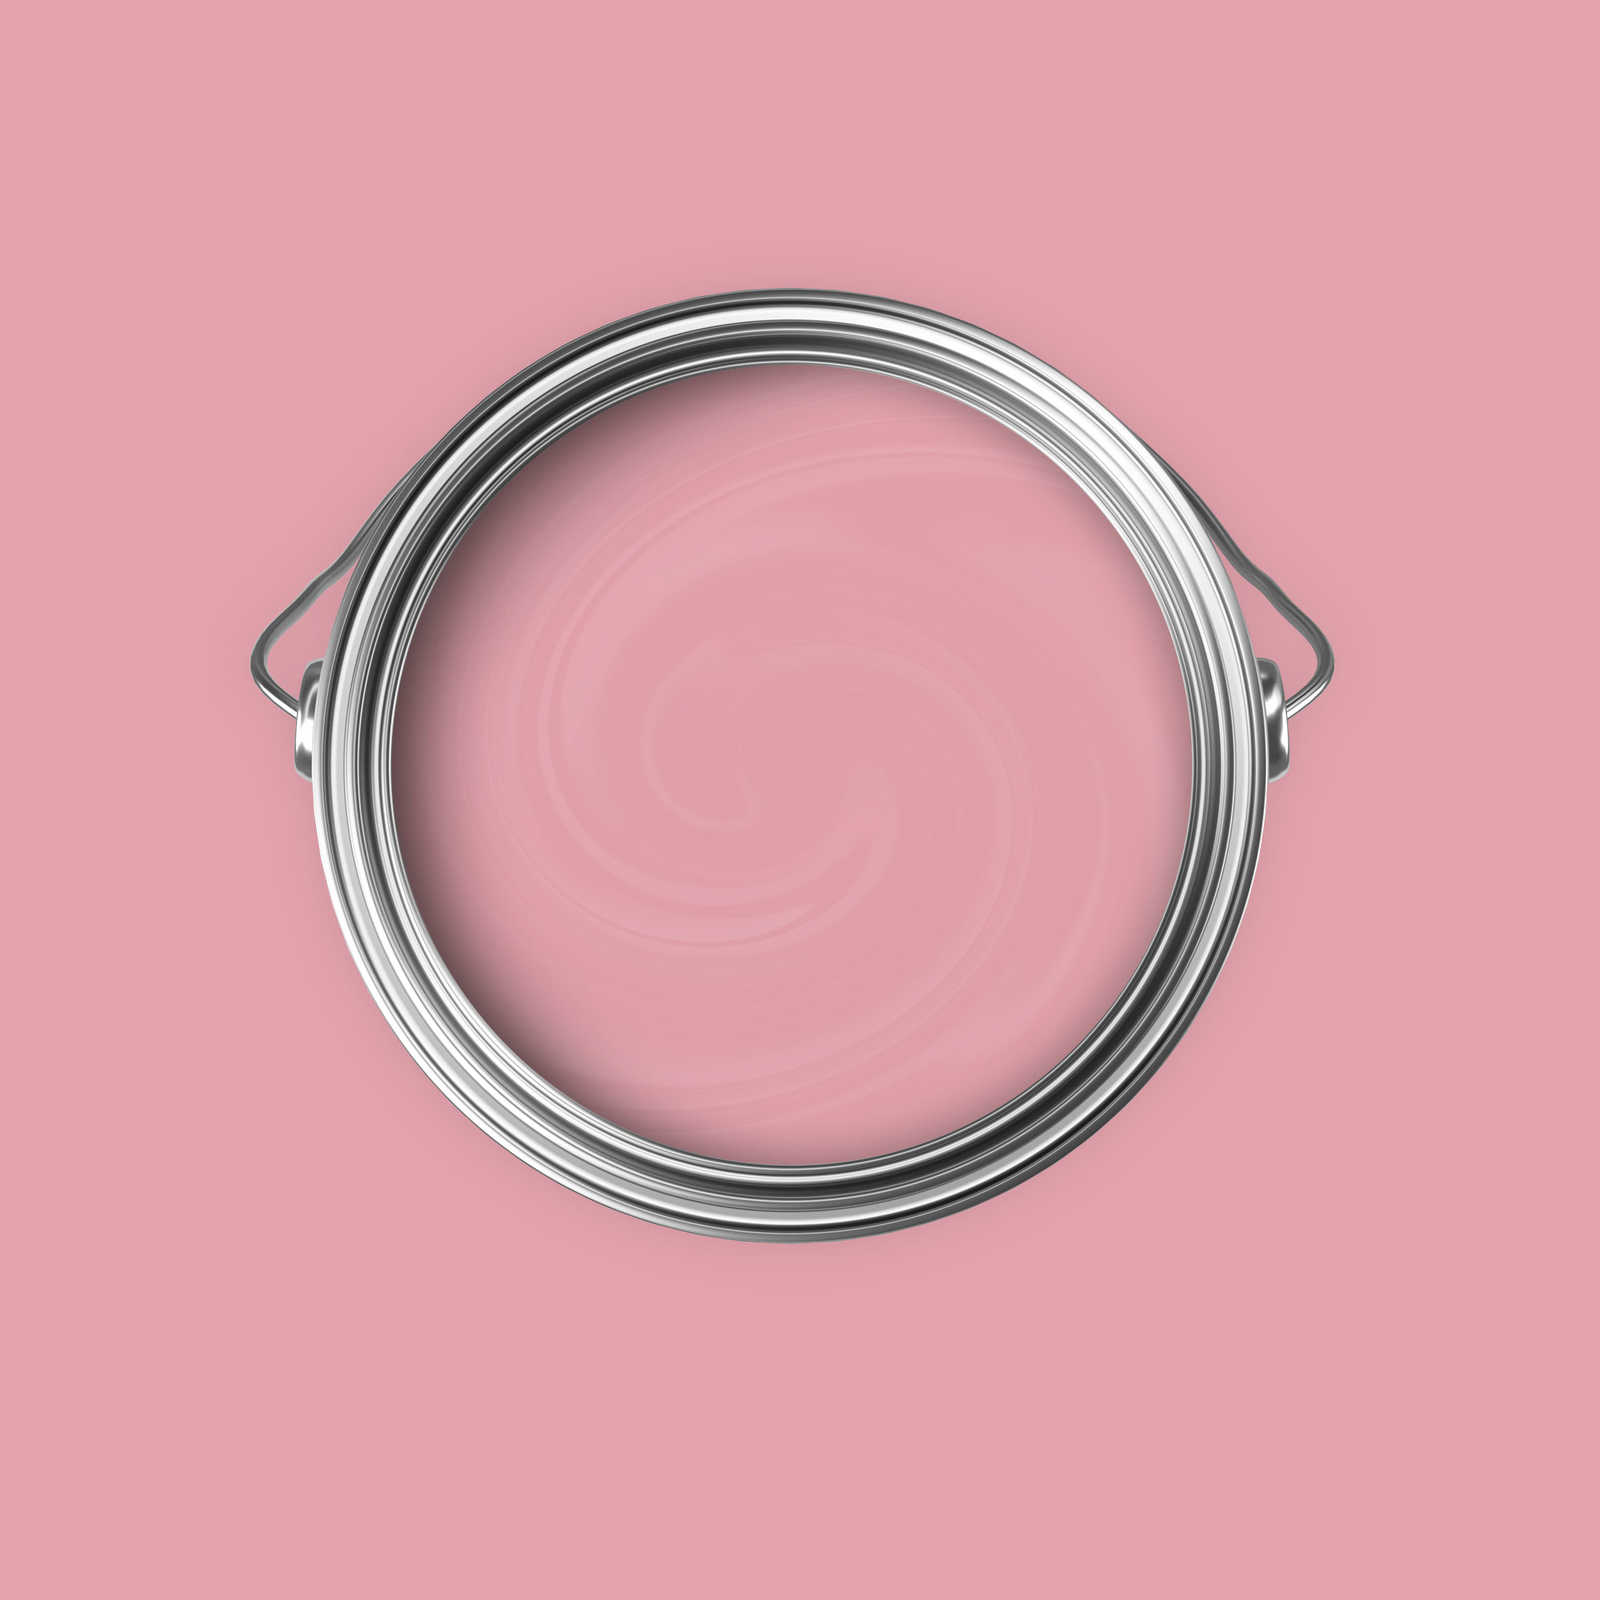             Premium Wall Paint cheerful baby pink »Blooming Blossom« NW1017 – 5 litre
        